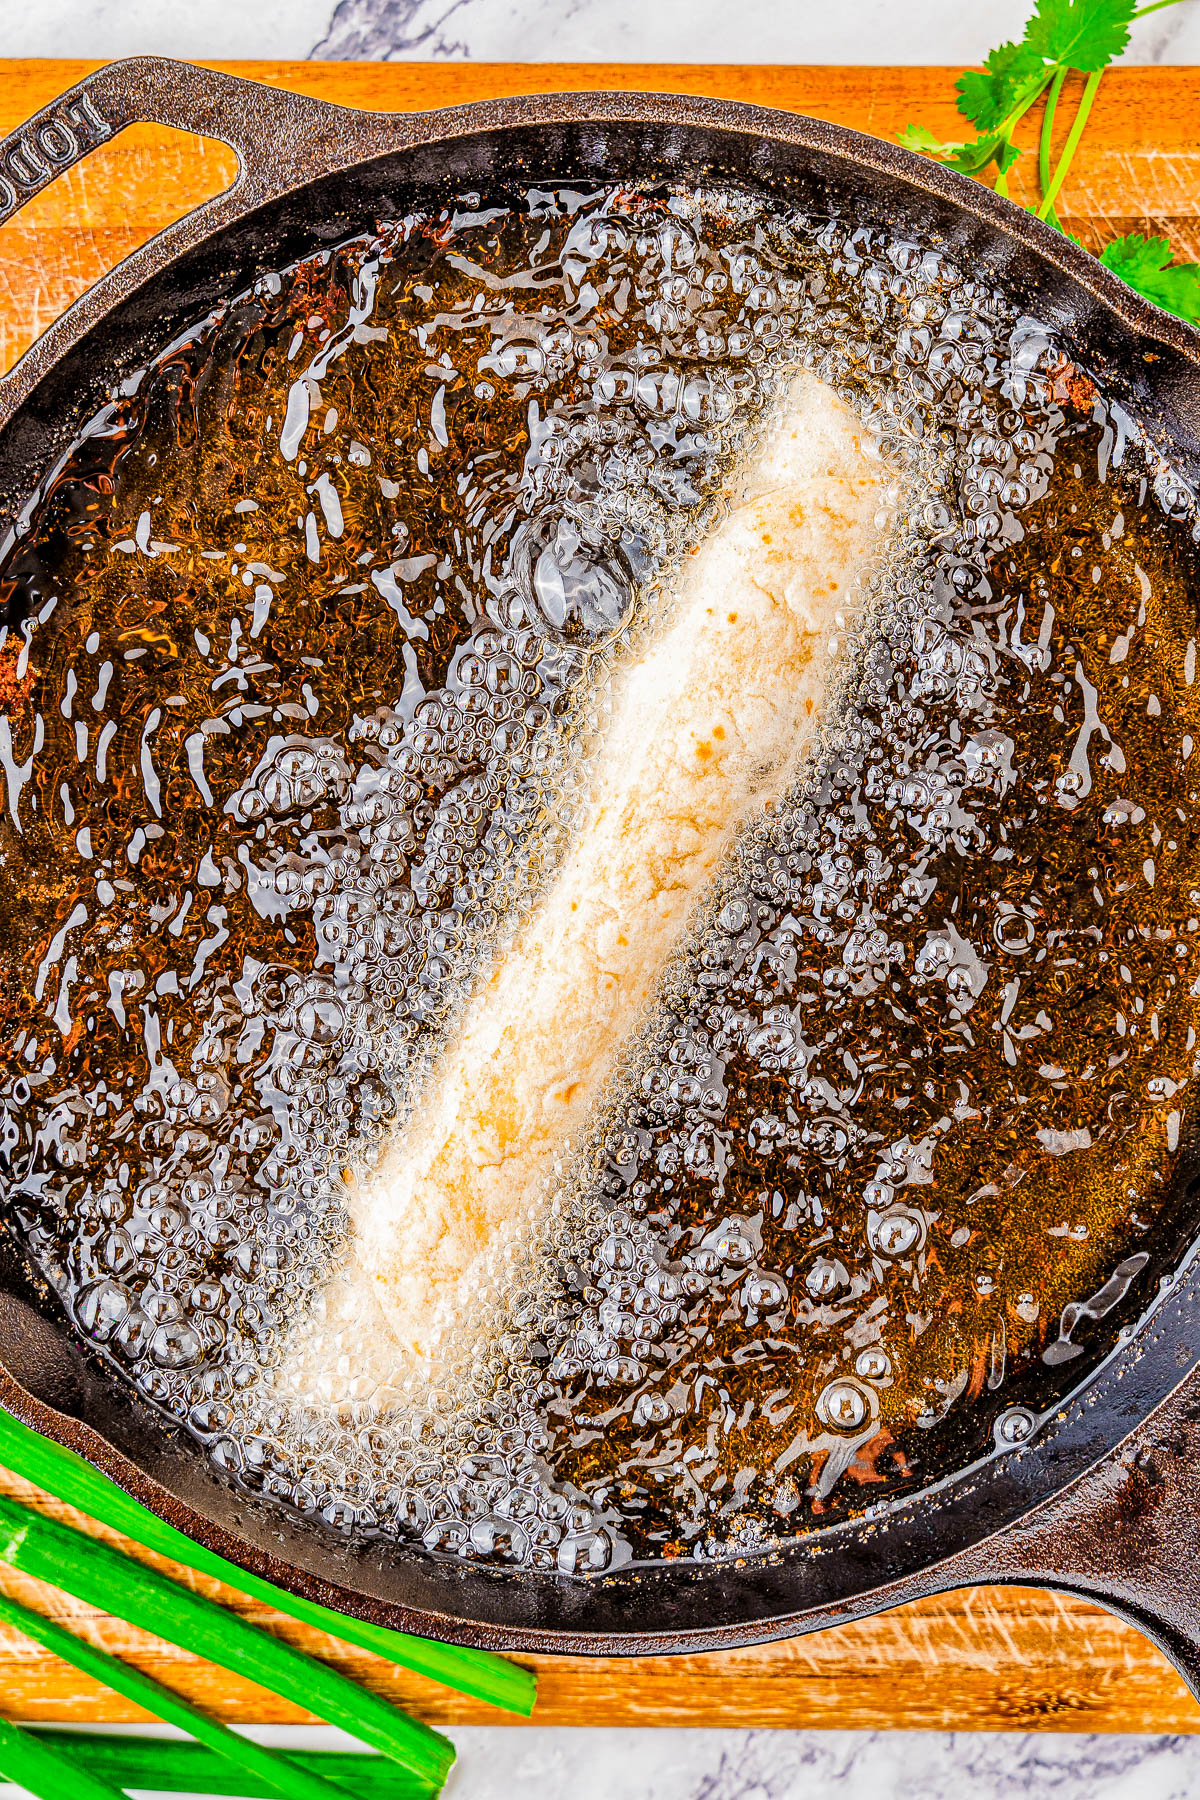 Taquito frying in a cast iron skillet, surrounded by bubbling oil, with fresh herbs and green onions nearby.